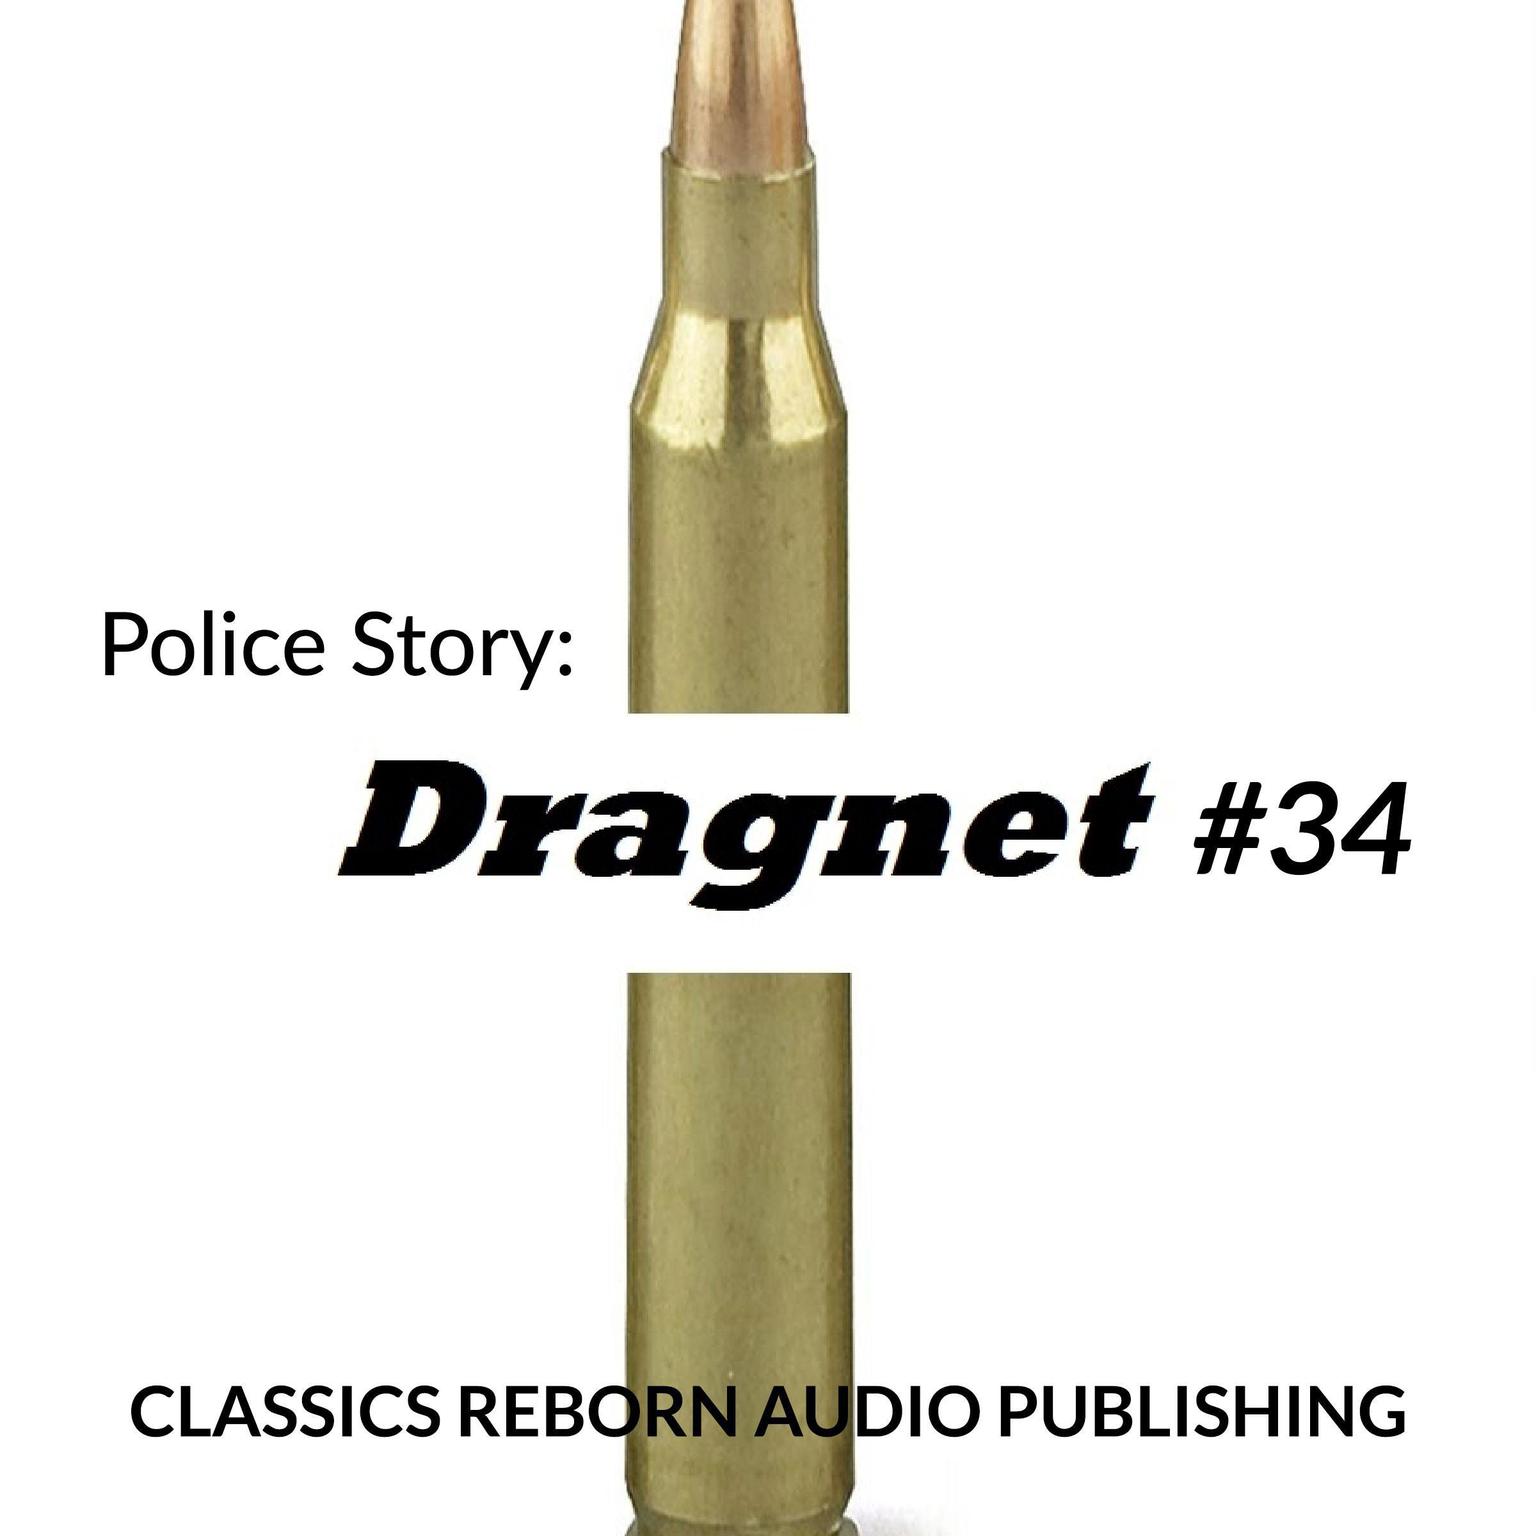 Police Story: Dragnet #34 Audiobook, by Classics Reborn Audio Publishing